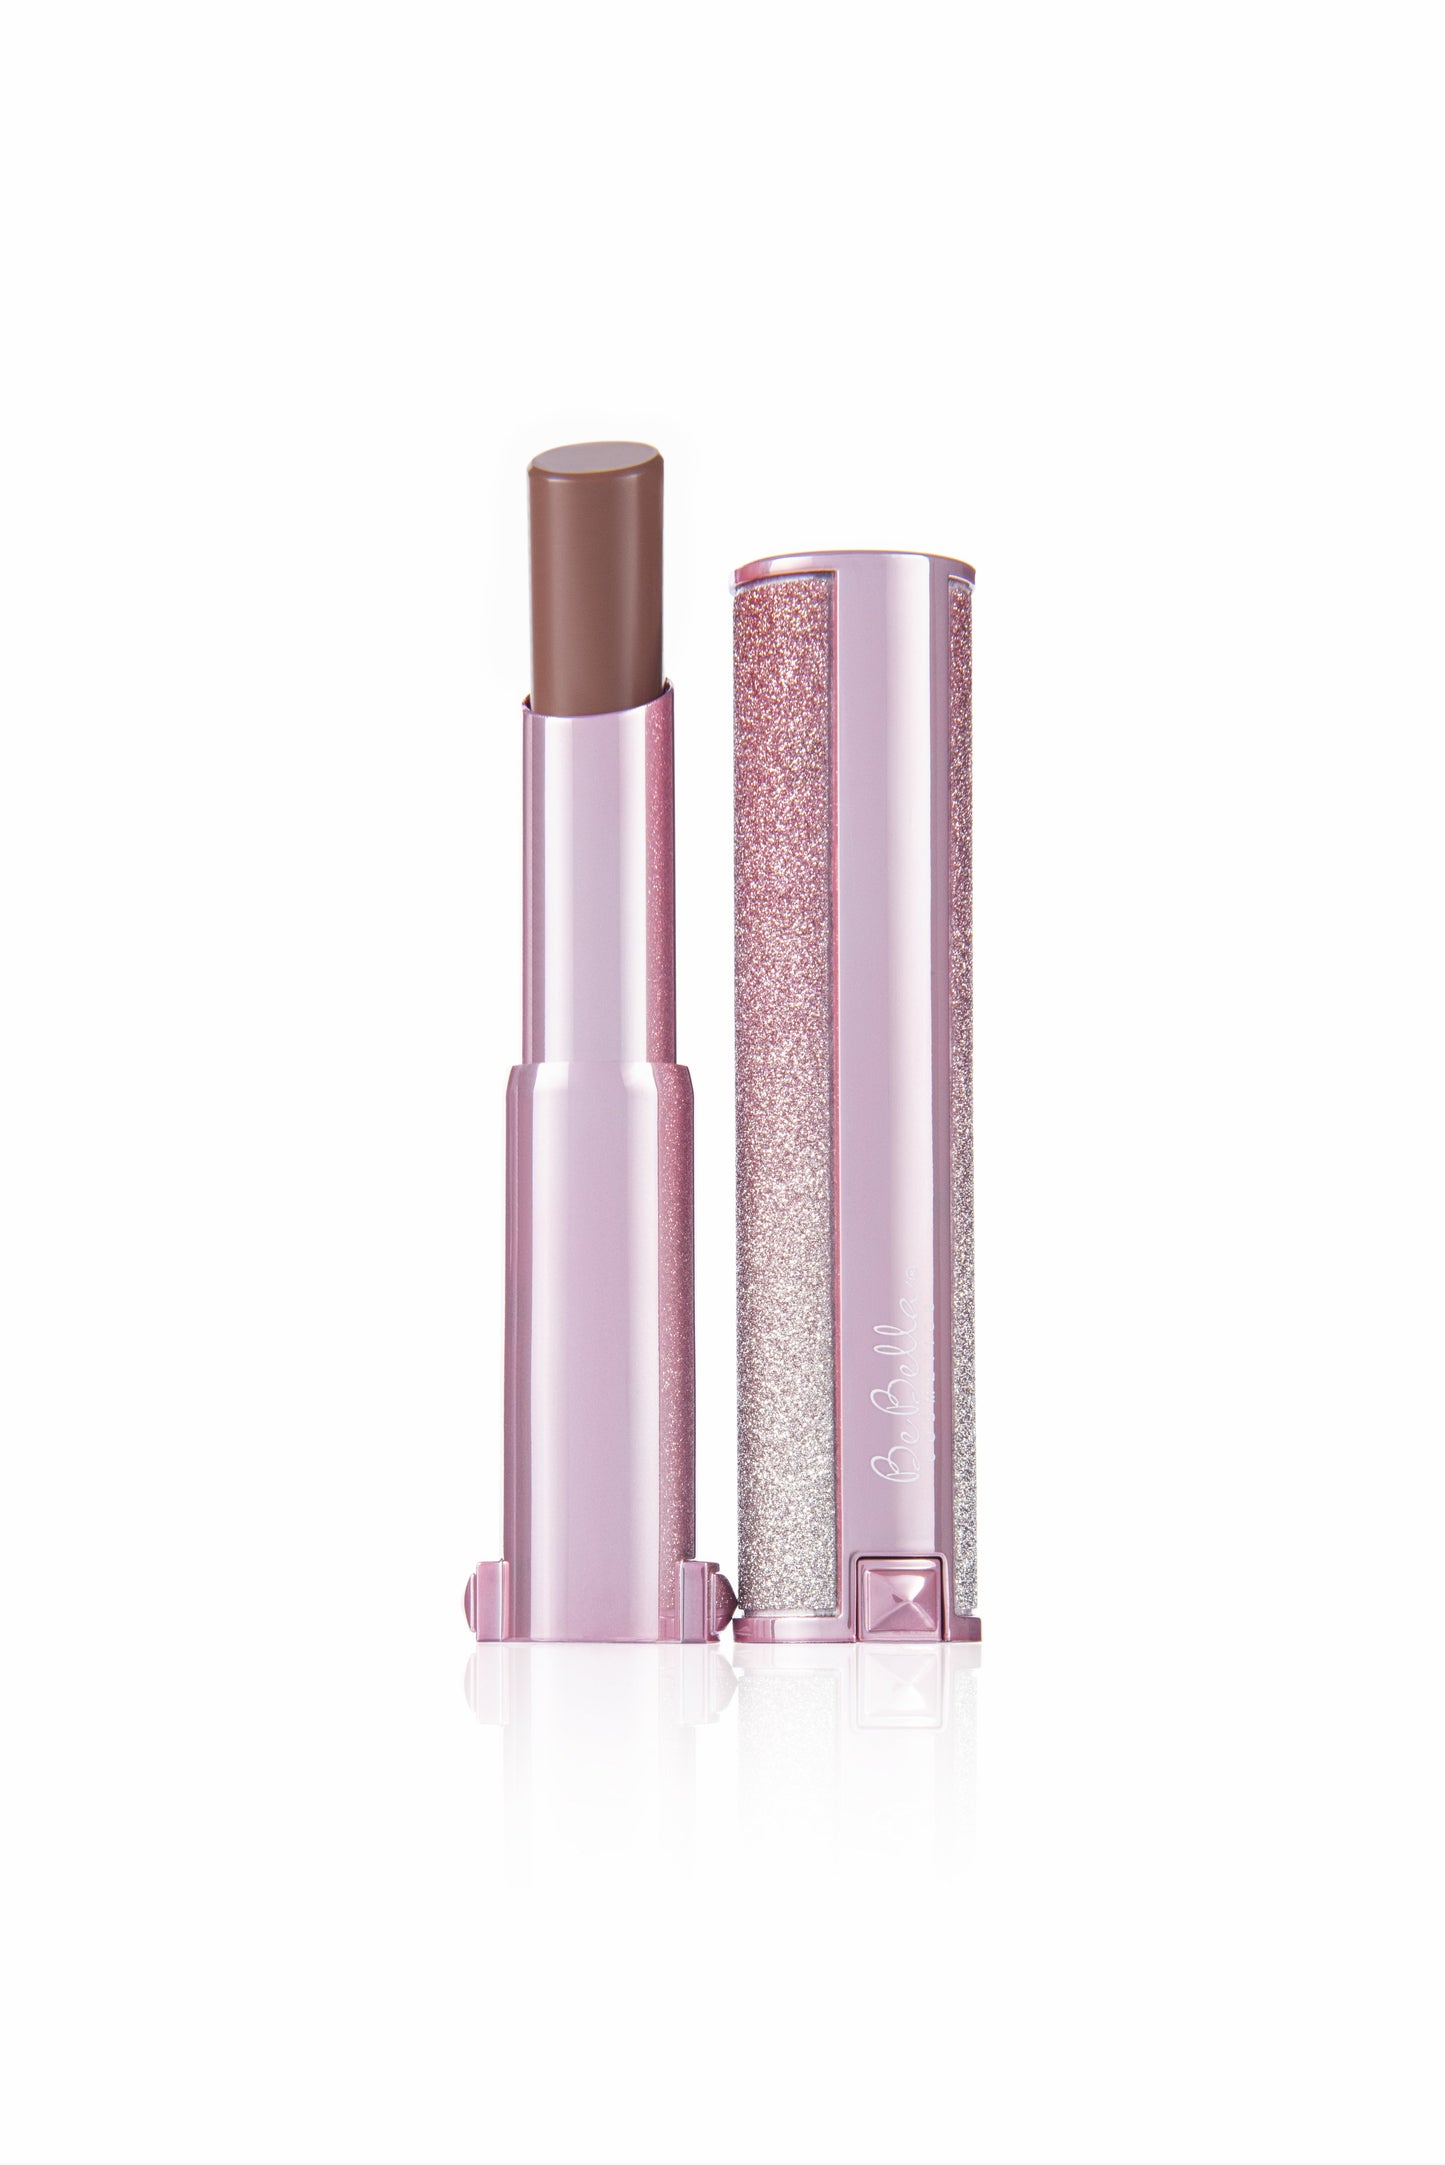 Here To Stay - Bella Luxe Lipstick